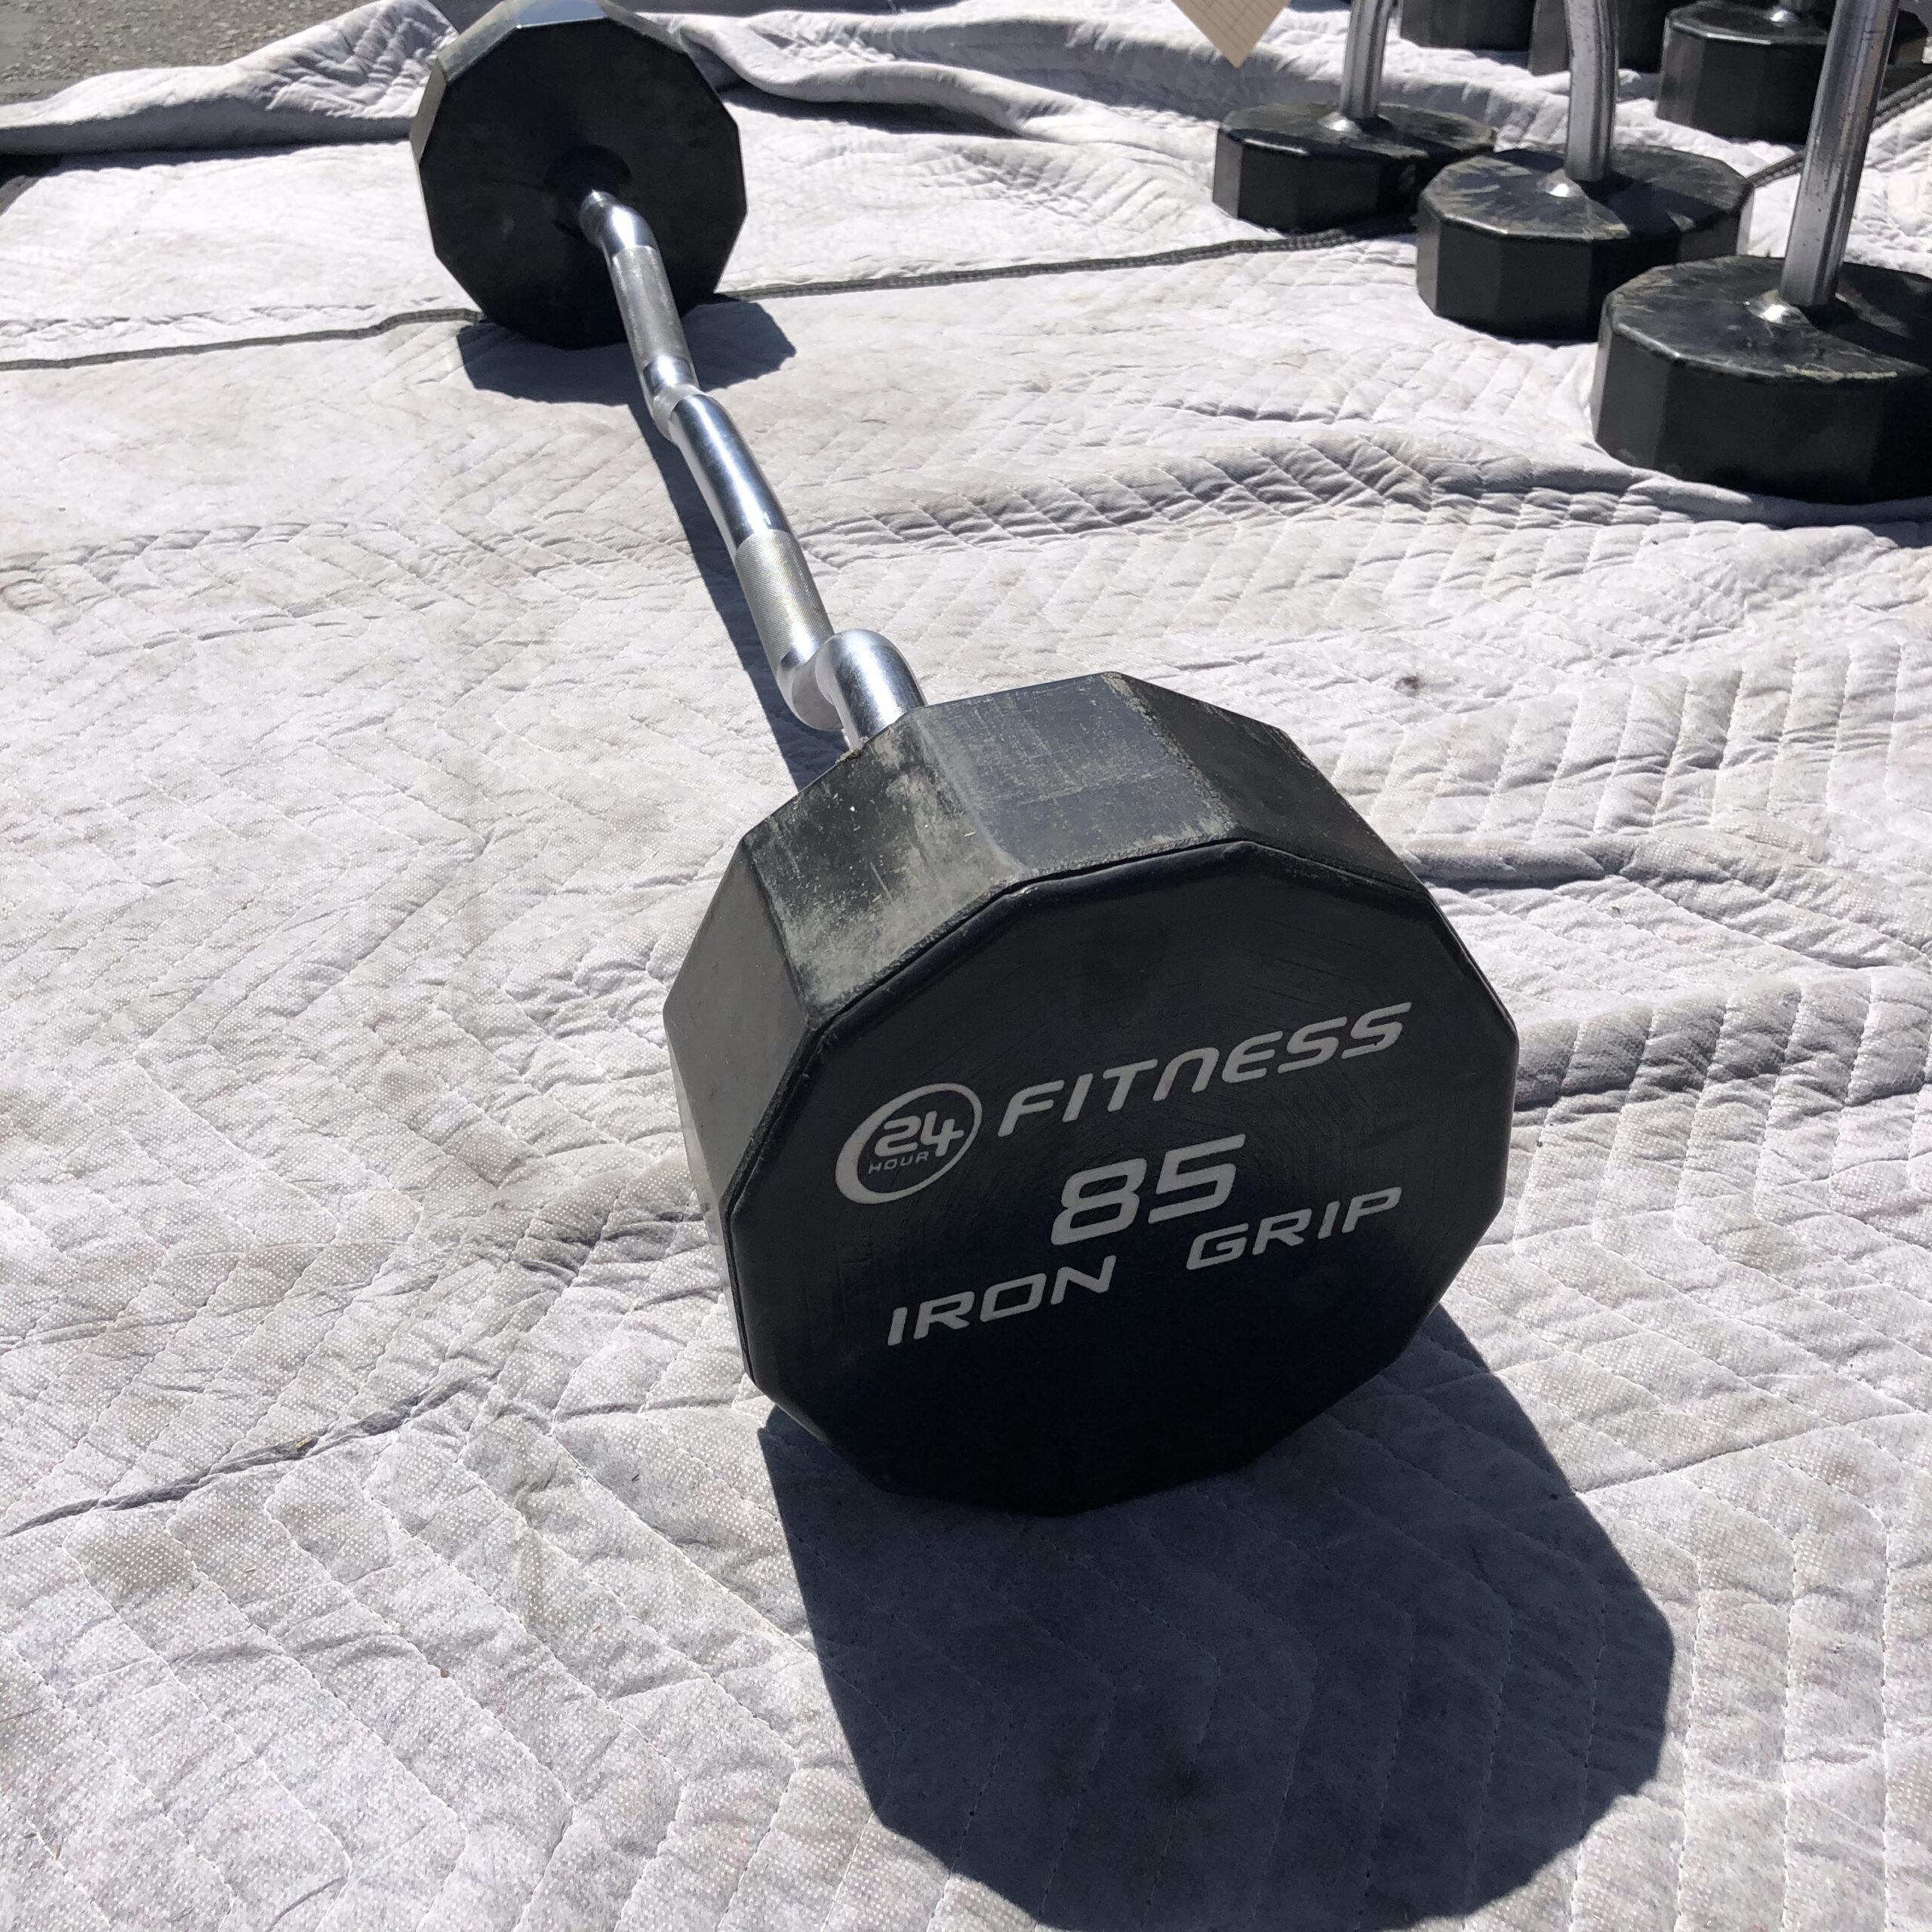 Iron Grip Olympic Barbell